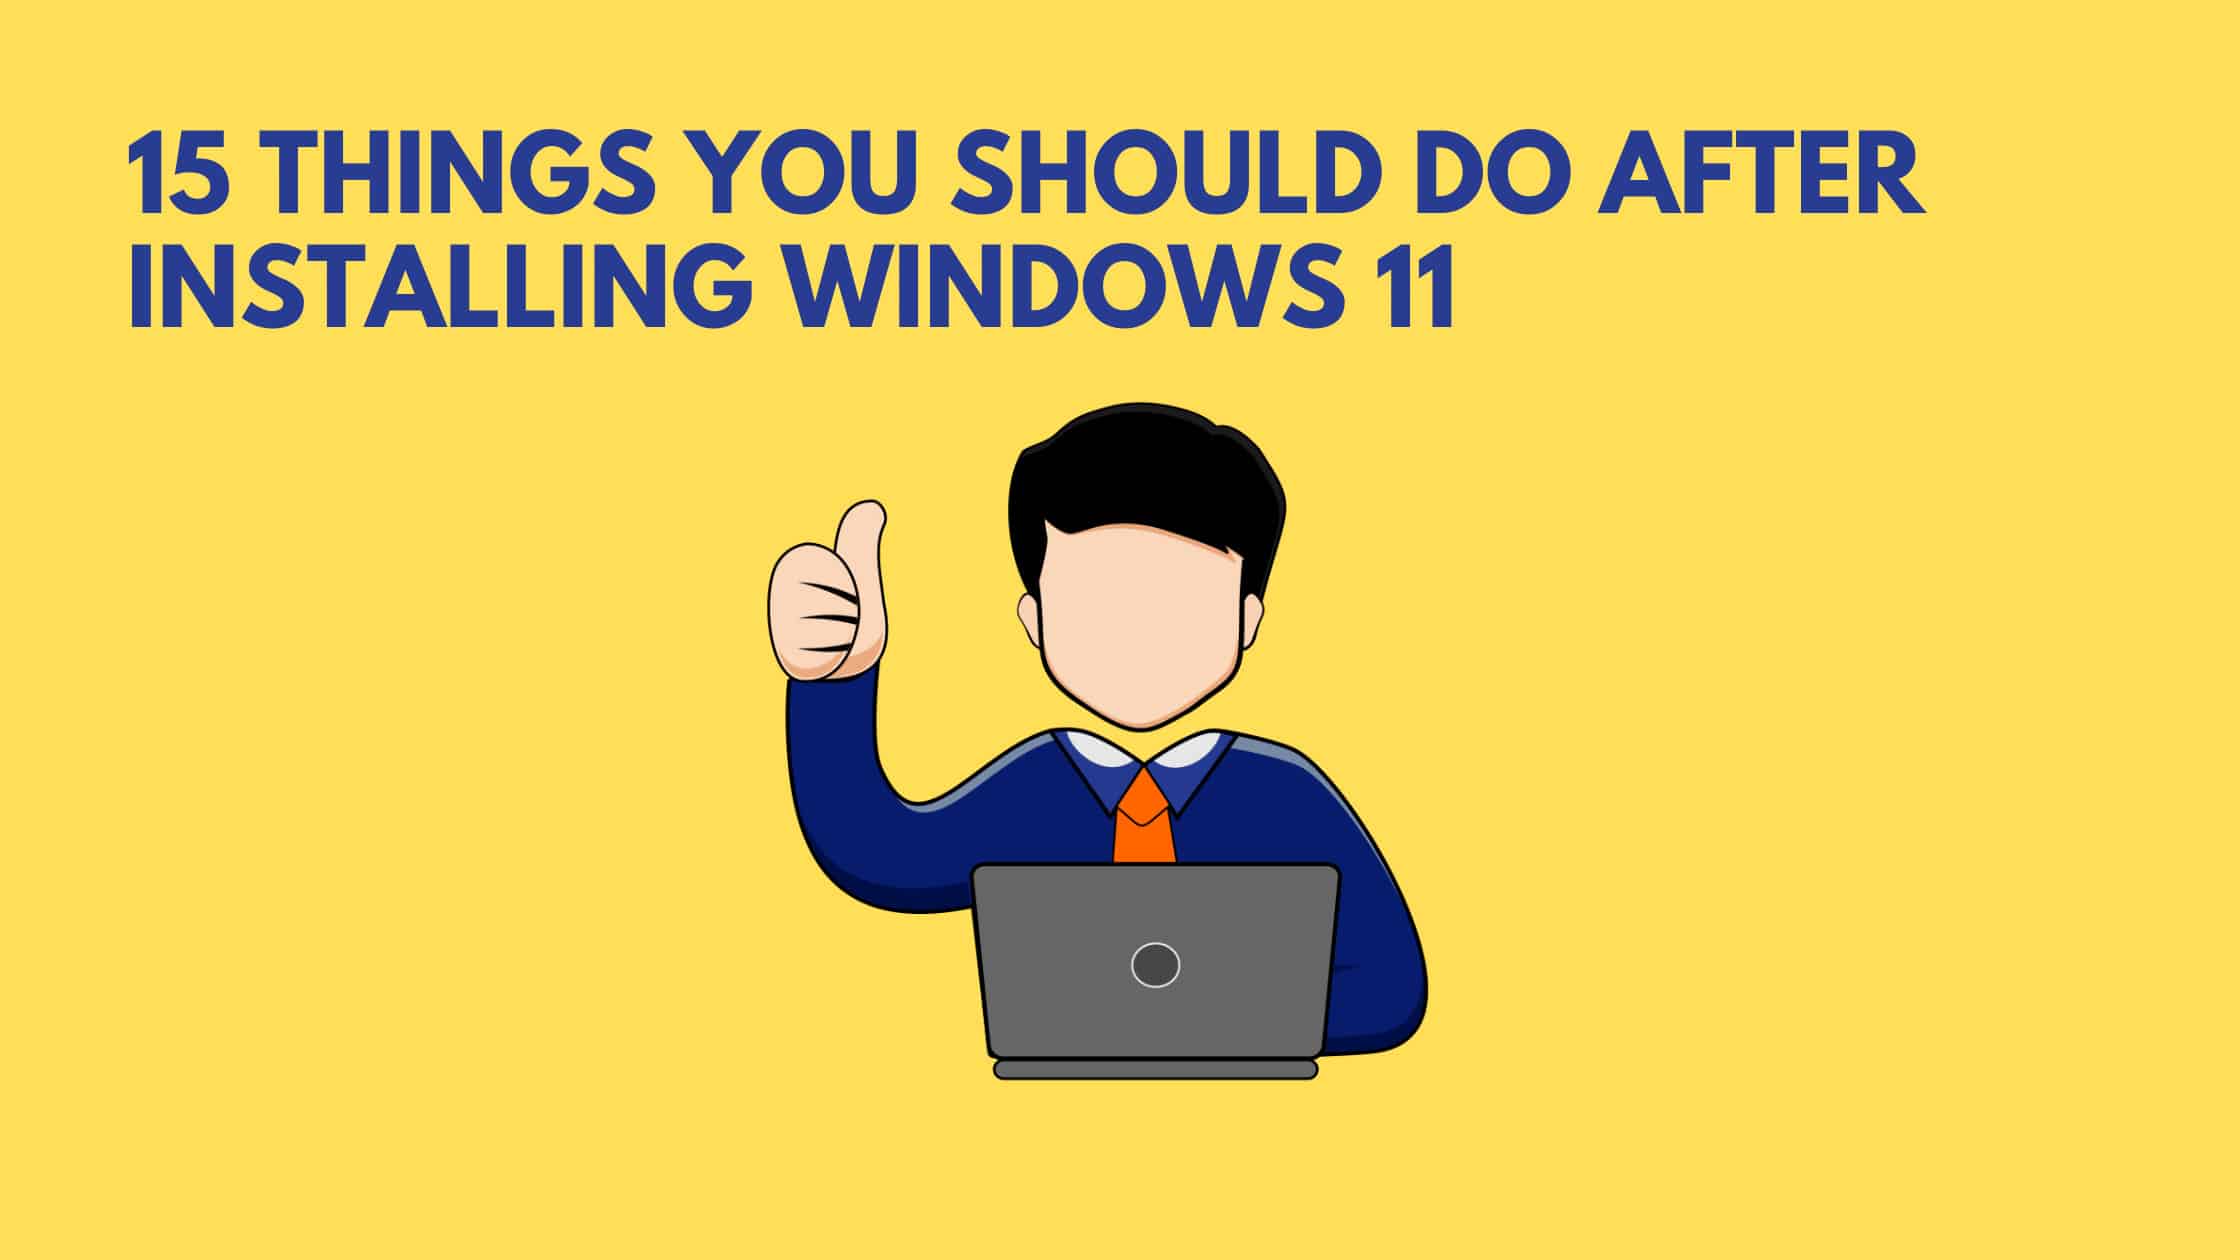 15 Things You Should Do After Installing Windows 11